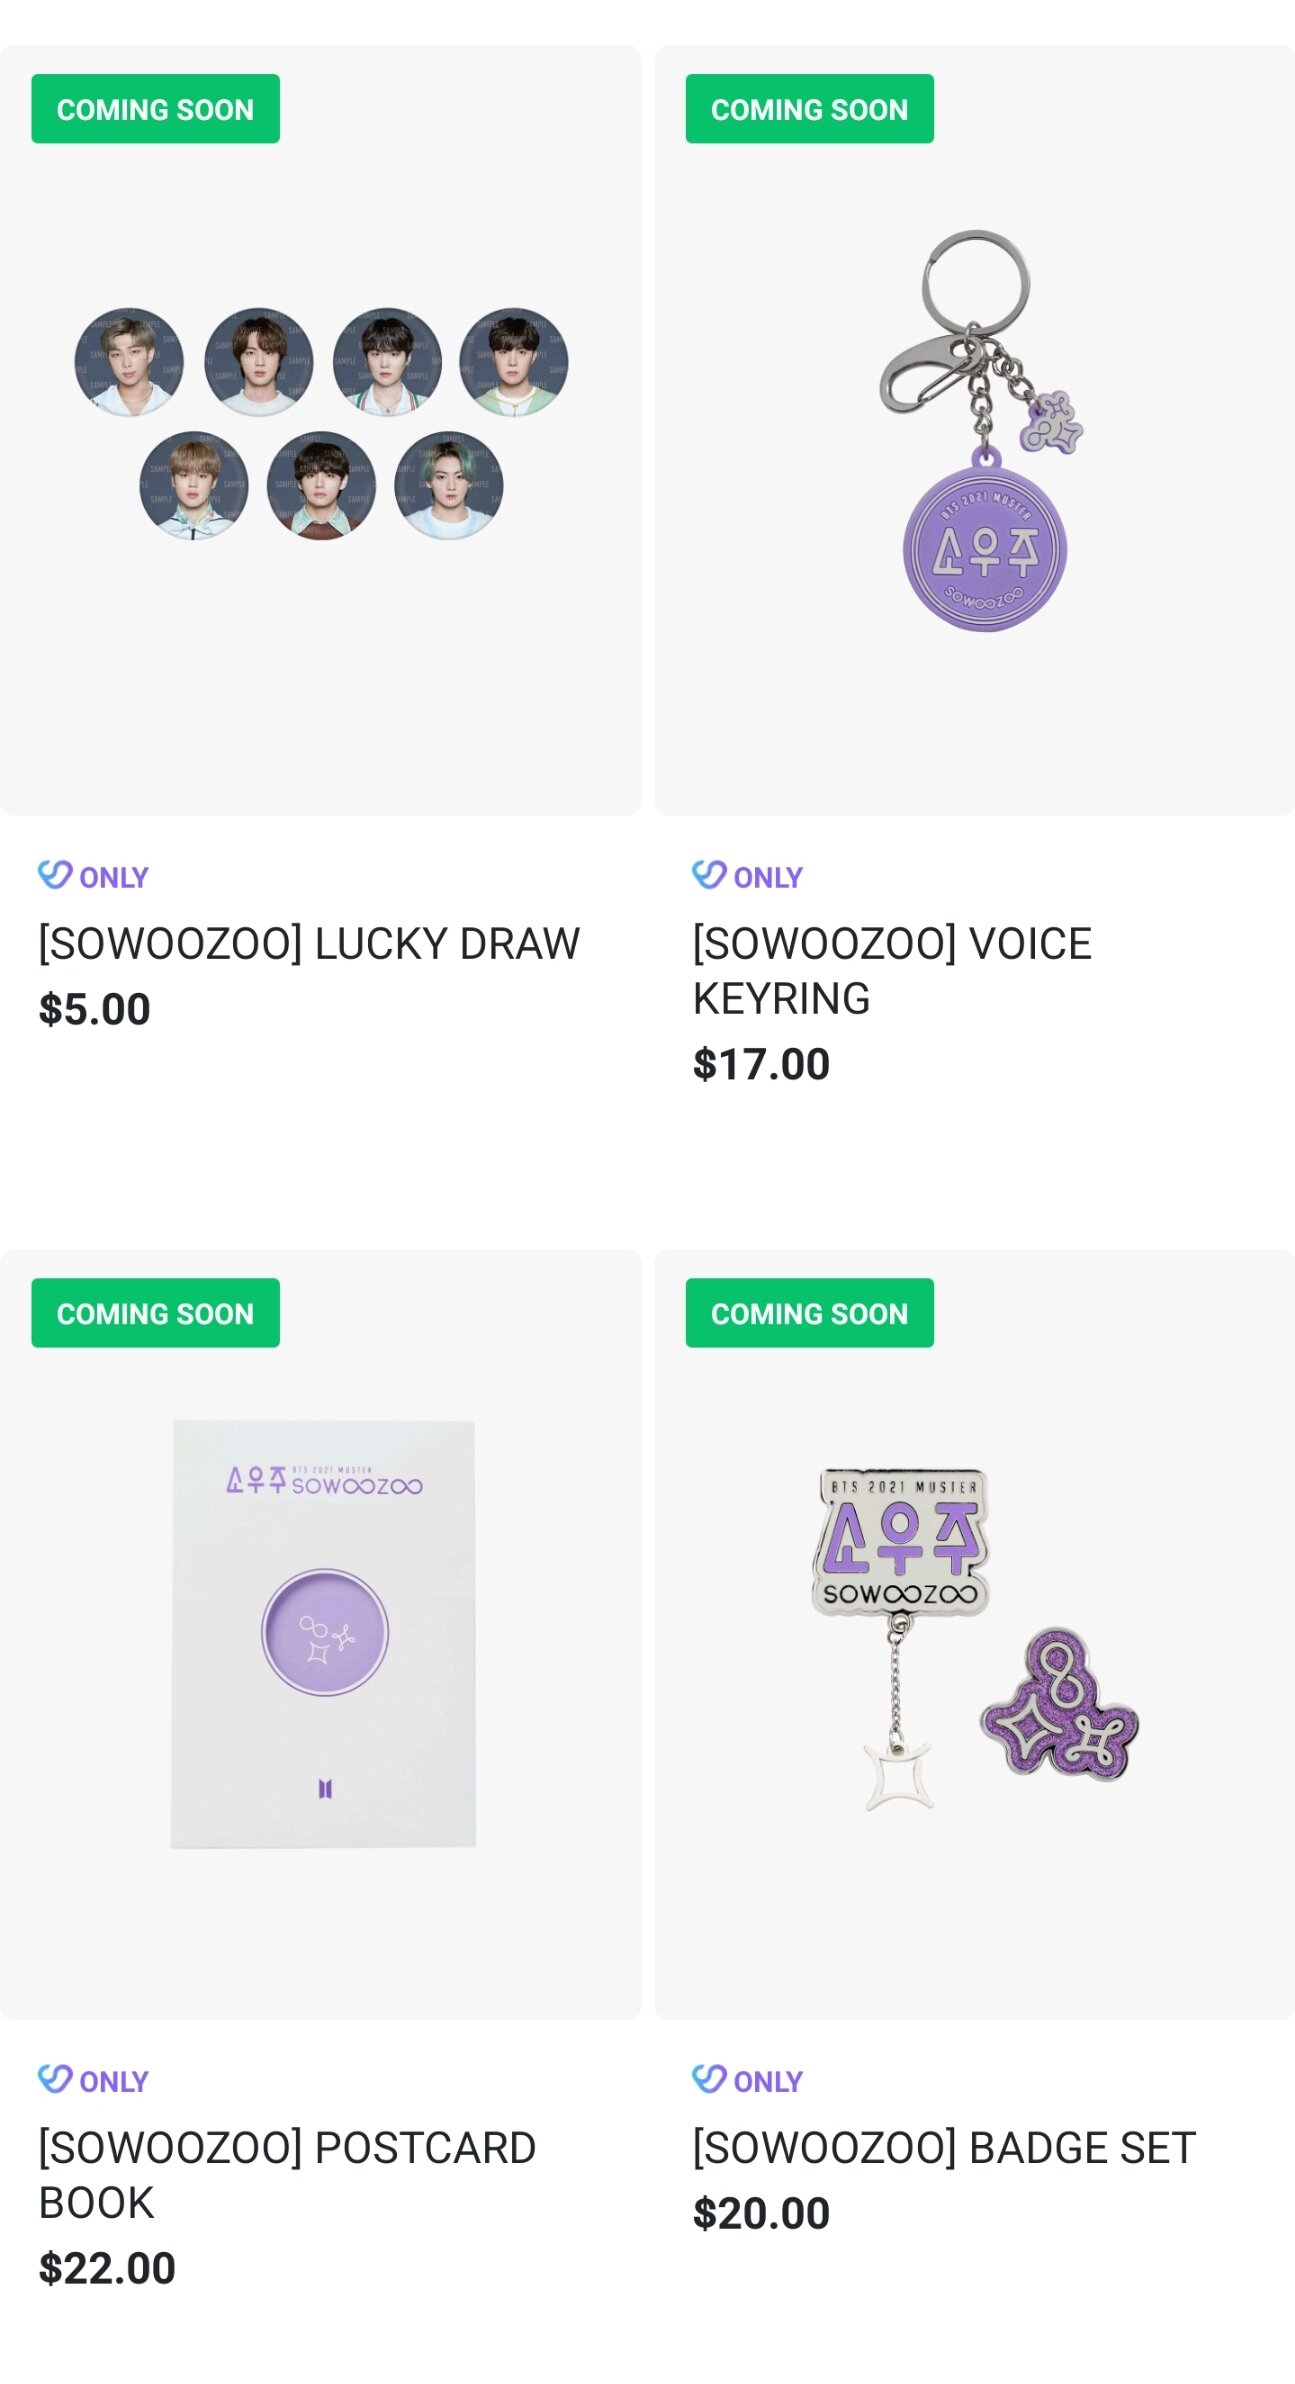 SOWOOZOO lucky draw, voice keyring, postcard book and badge set